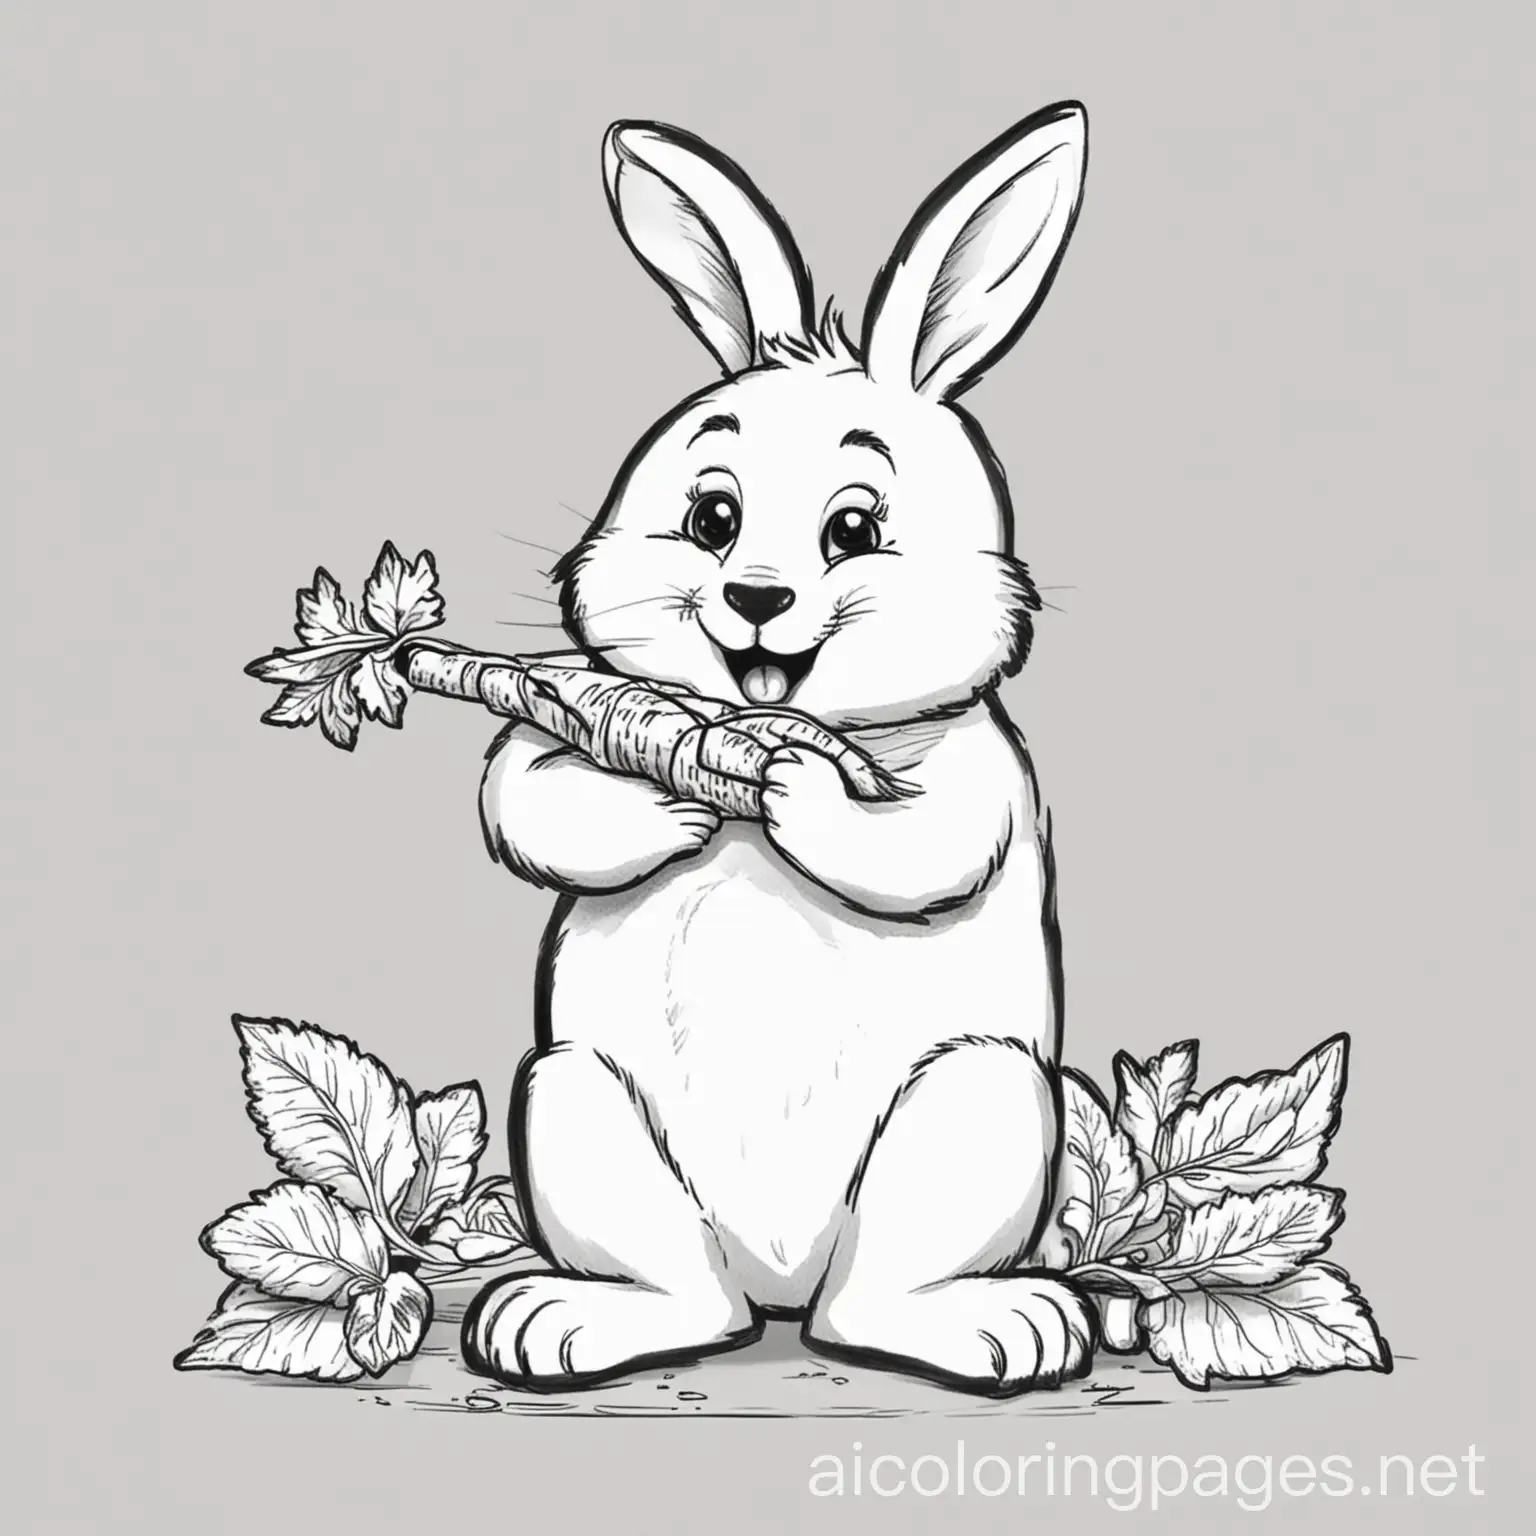 Happy-Rabbit-Eating-Carrot-Coloring-Page-Black-and-White-Line-Art